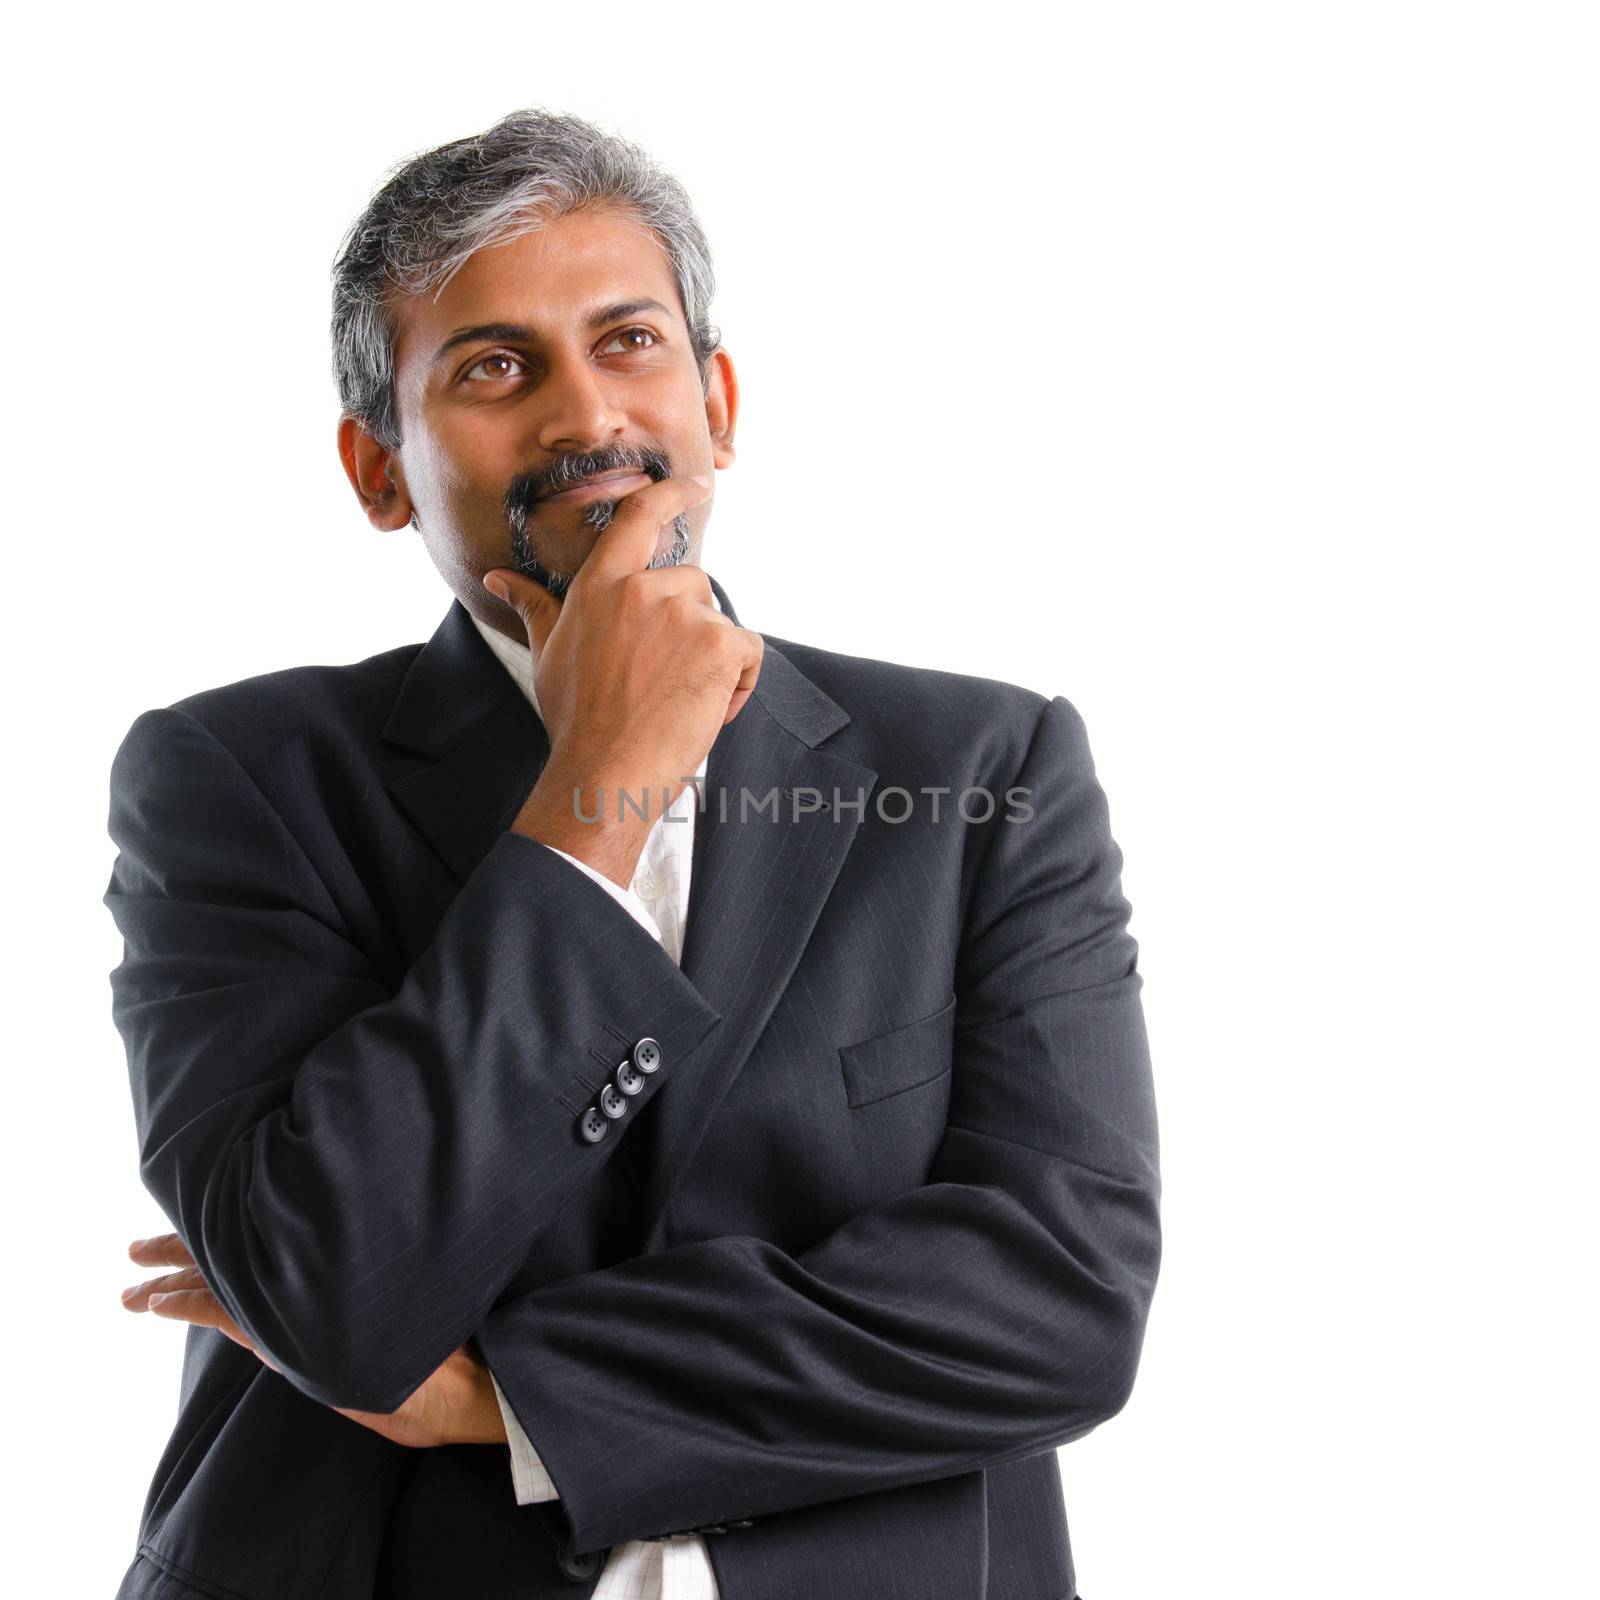 Indian businessman thinking. Attractive mature gray hair Indian business man thinking, isolated on white background. Handsome Asian India model.